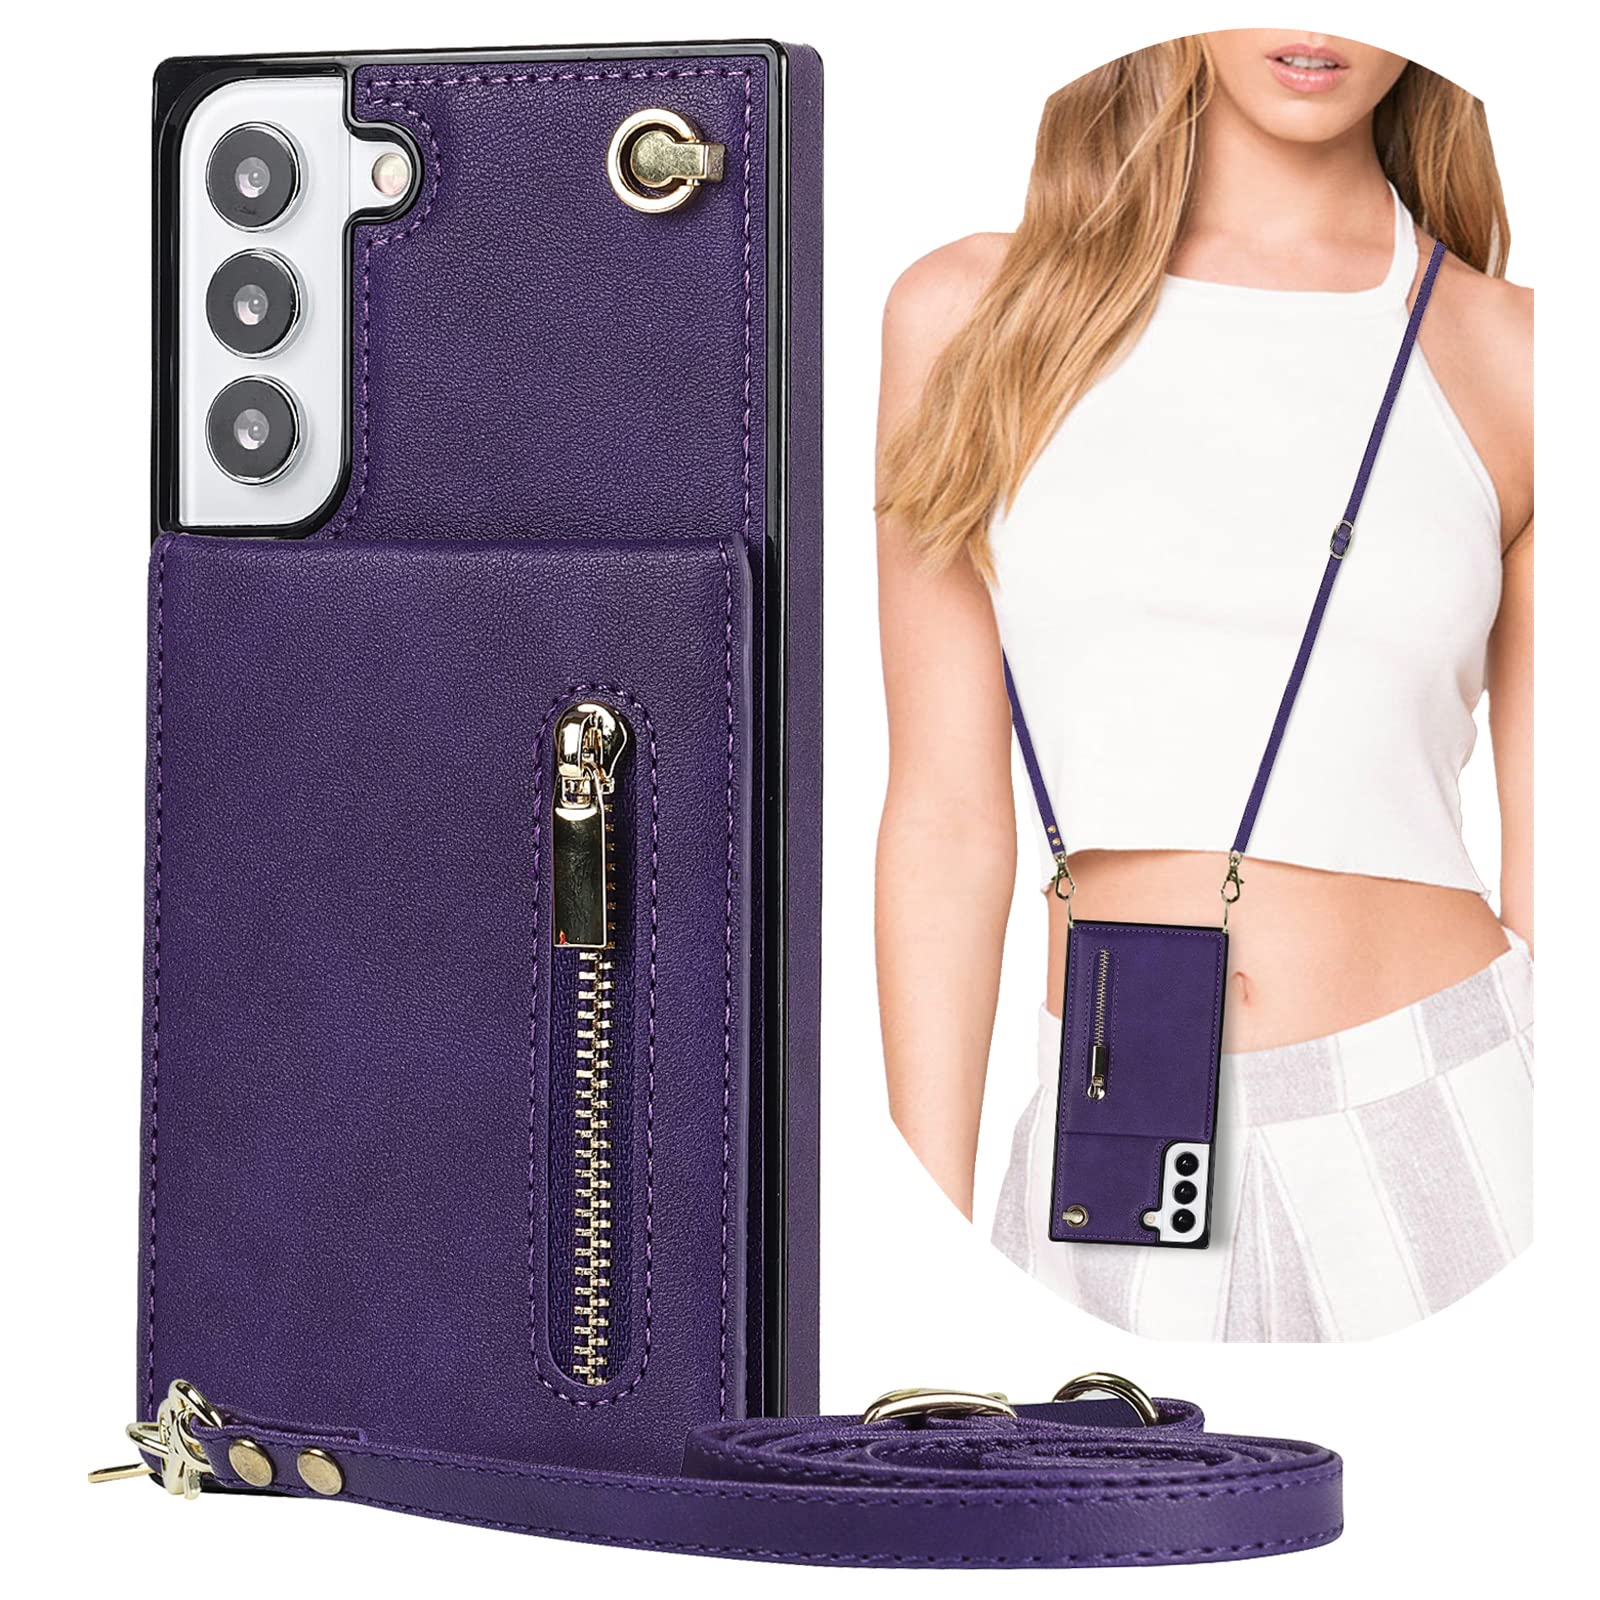 Tncavo Crossbody Wallet Case for Samsung Galaxy S22 Plus for Women, RFID Blocking Card Holder PU Leather Zipper Handbag Purse Phone Cover with Lanyard Strap for Samsung Galaxy S22 Plus XKL Purple